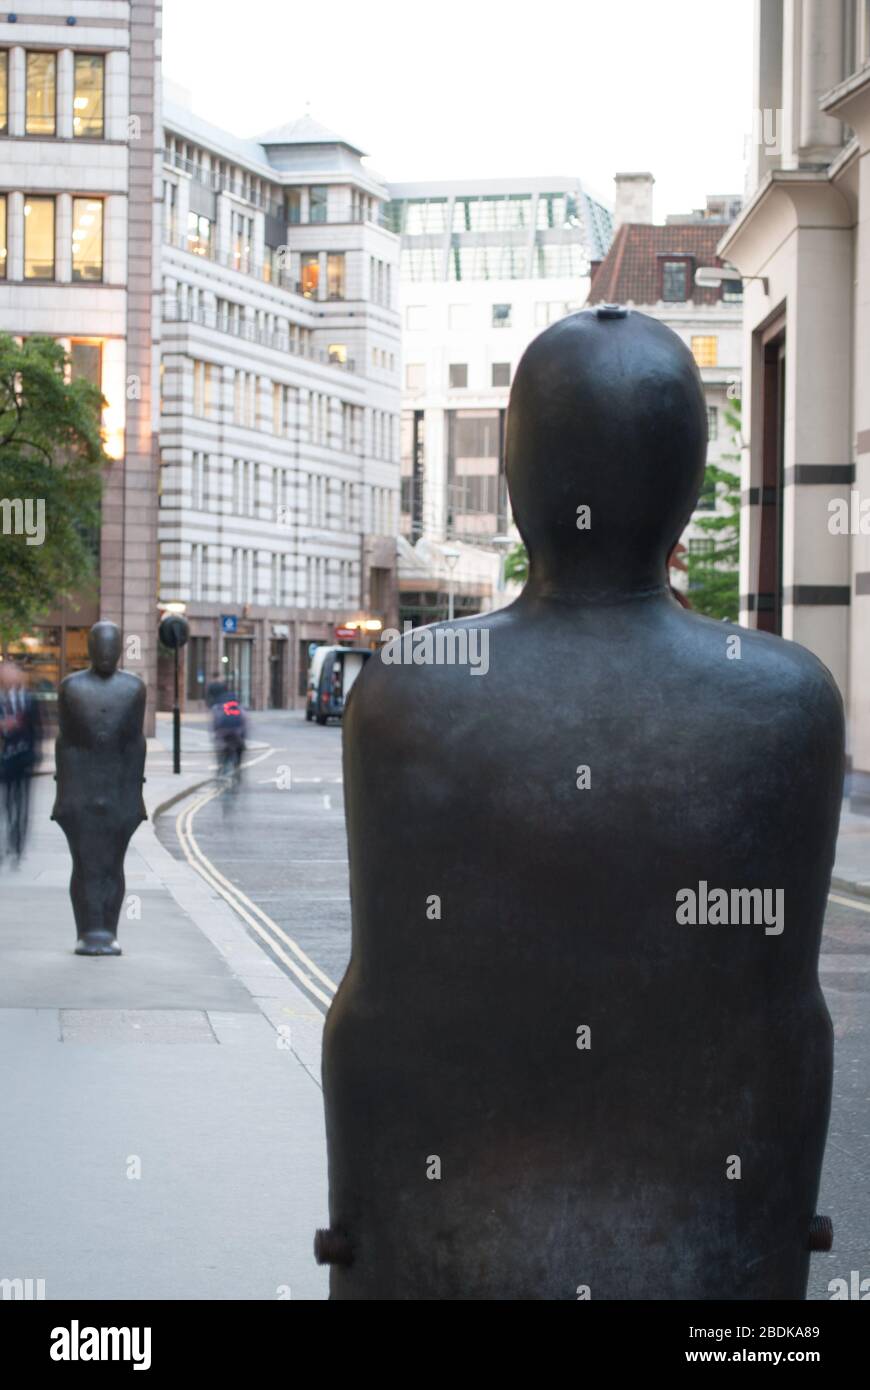 Two Iron Statues Parallel Field Sculpture in the City on St. Mary Axe, City of London EC1 Stock Photo